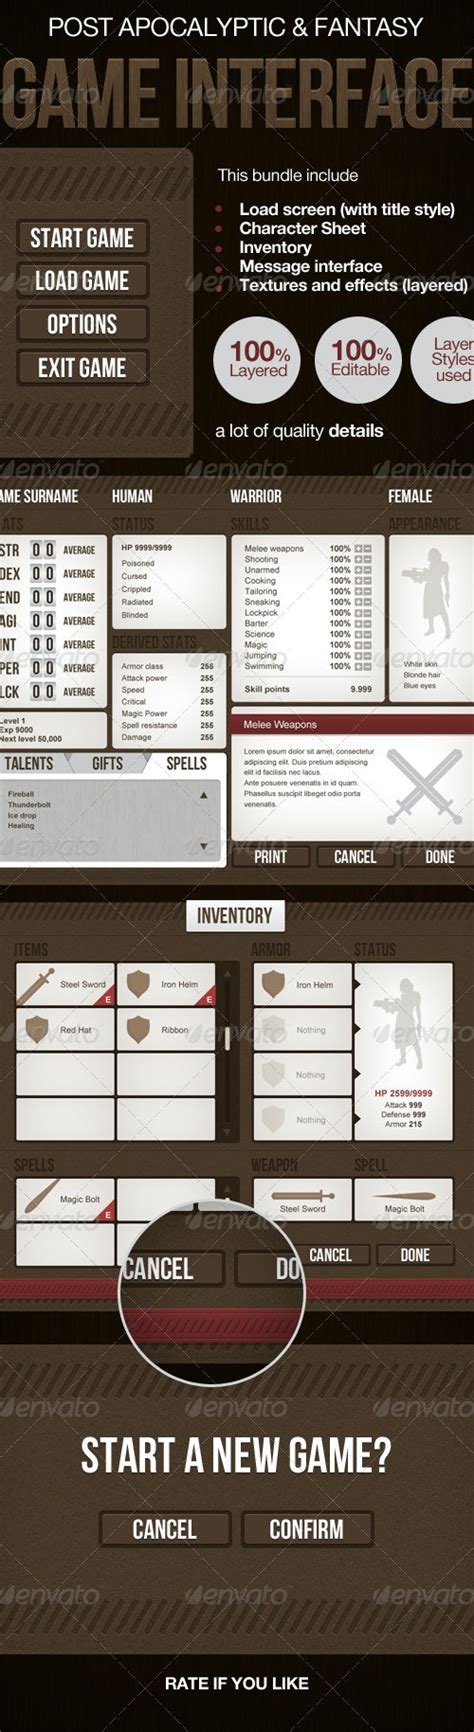 Post Apocalyptic Or Medieval Rpg Game Interface By Freewing Graphicriver